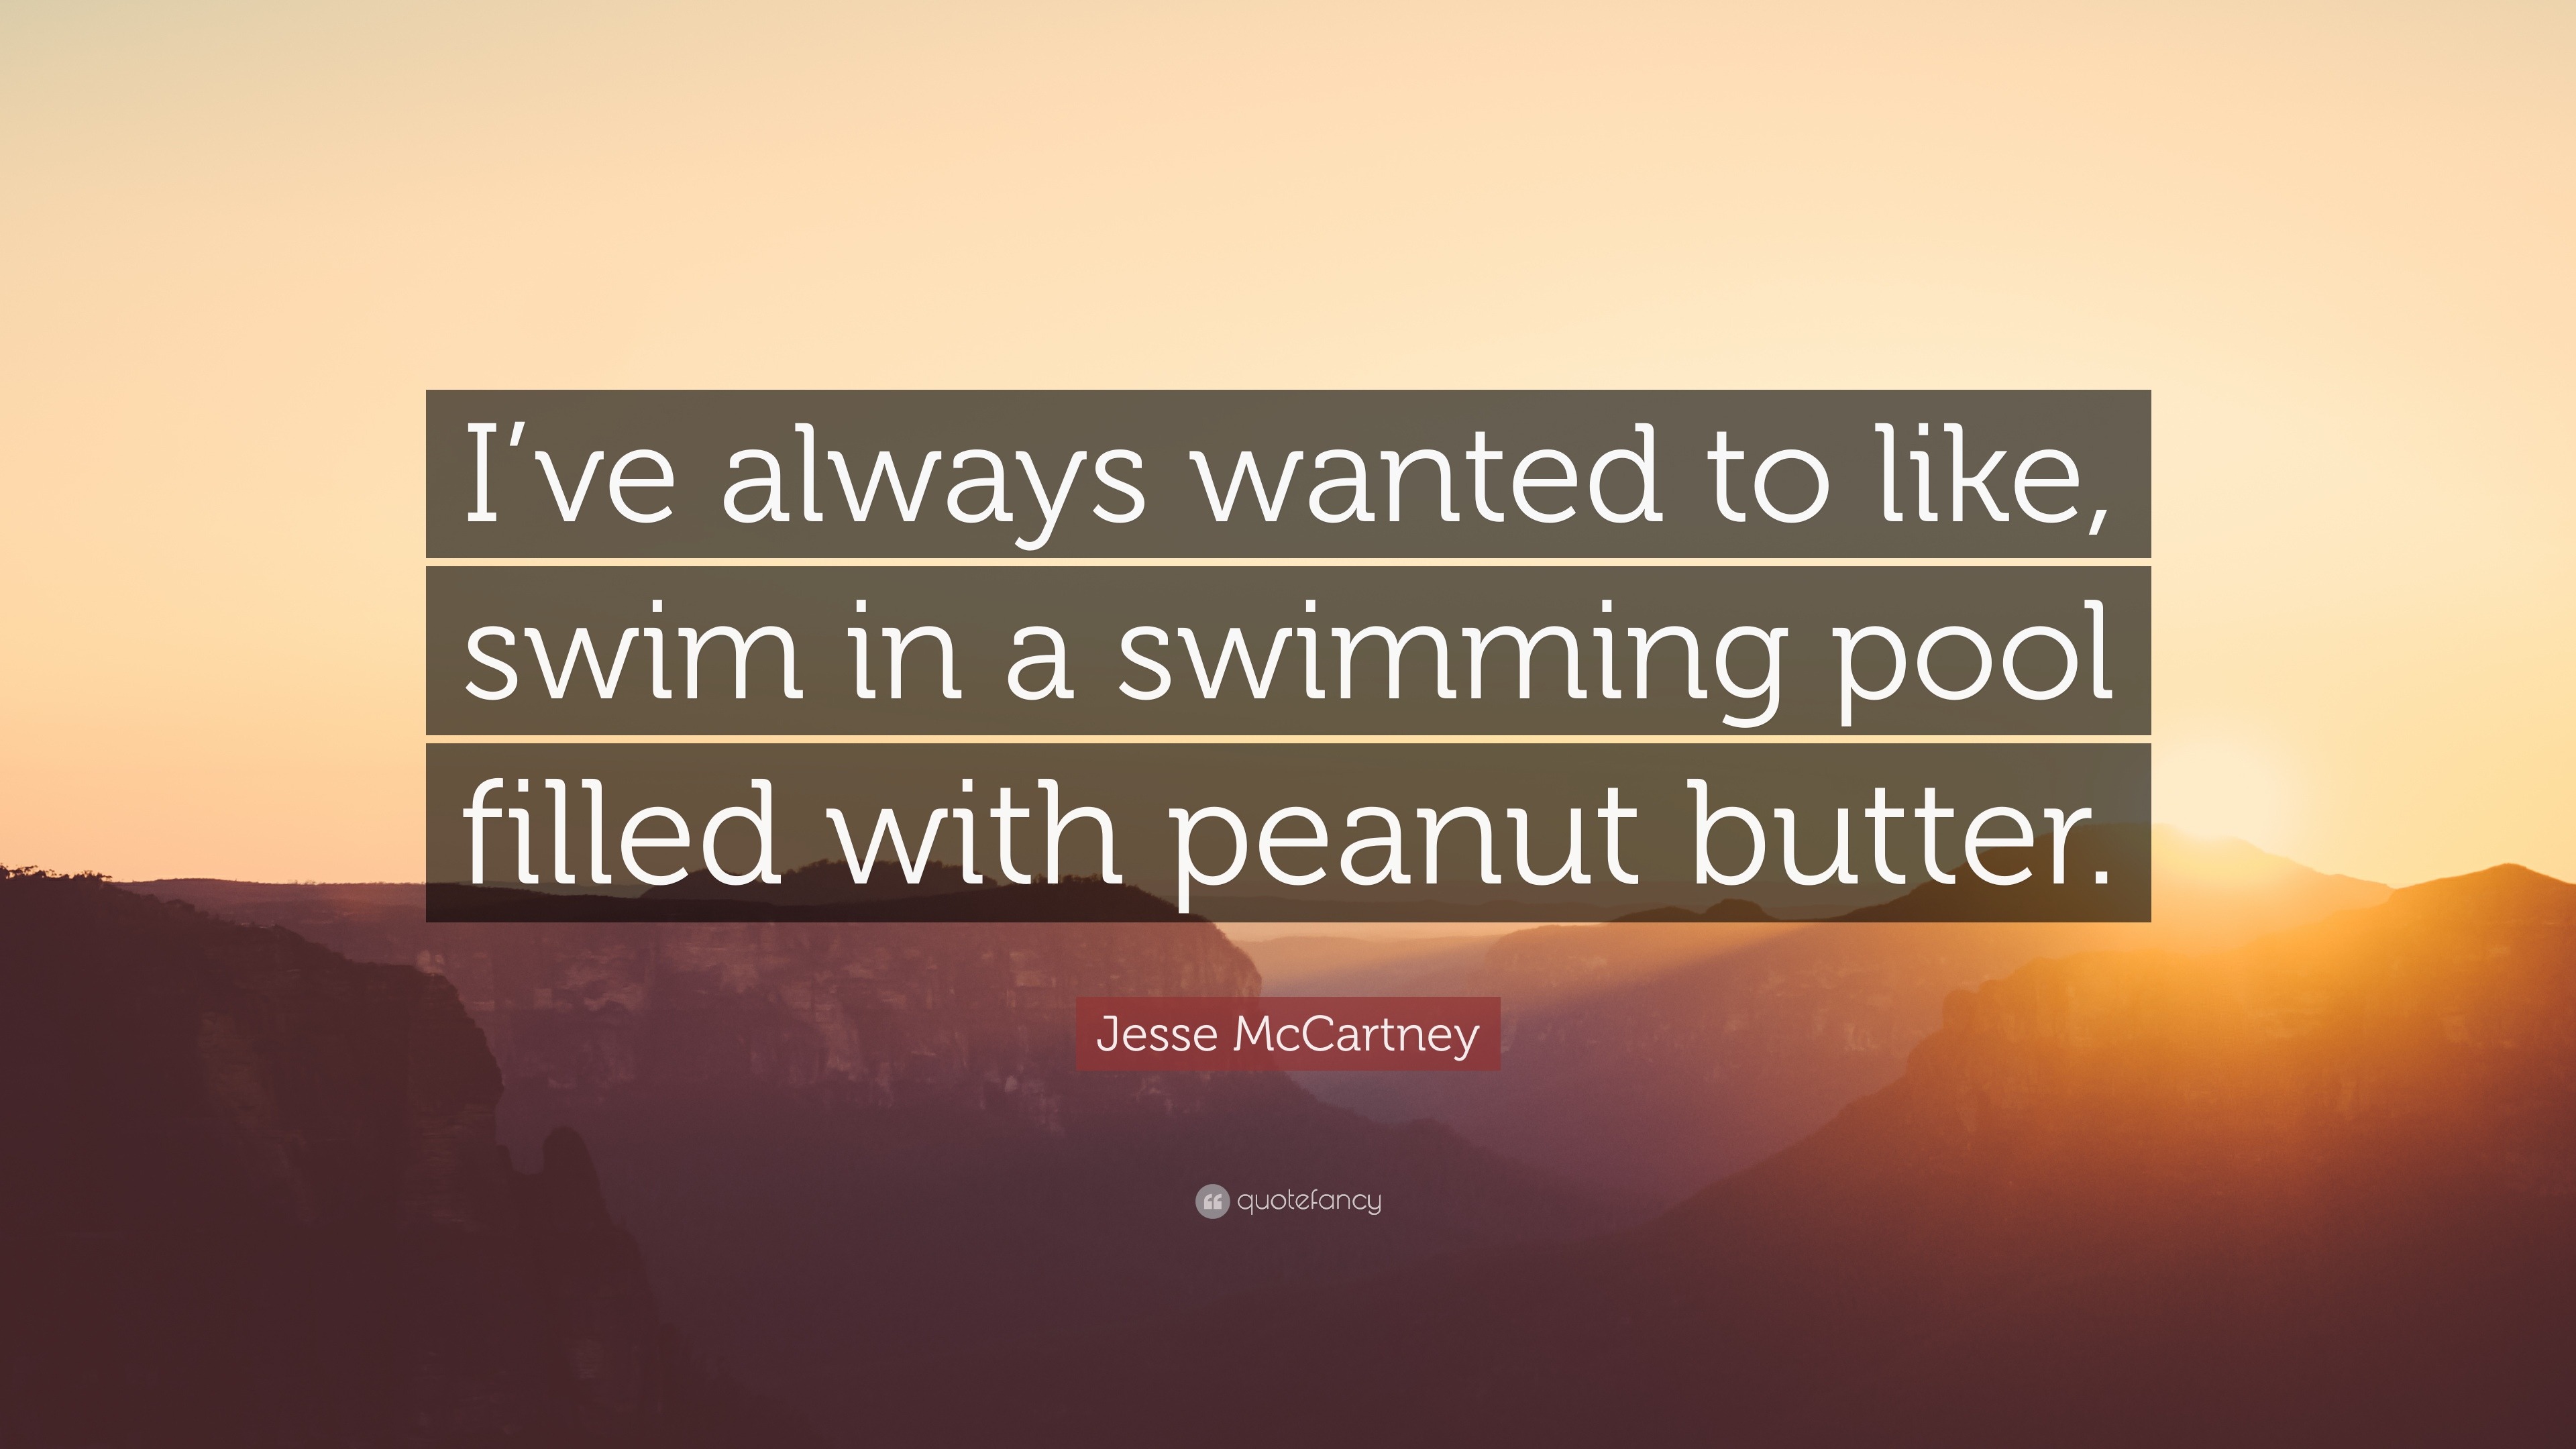 Jesse McCartney Quote: “I’ve always wanted to like, swim in a swimming